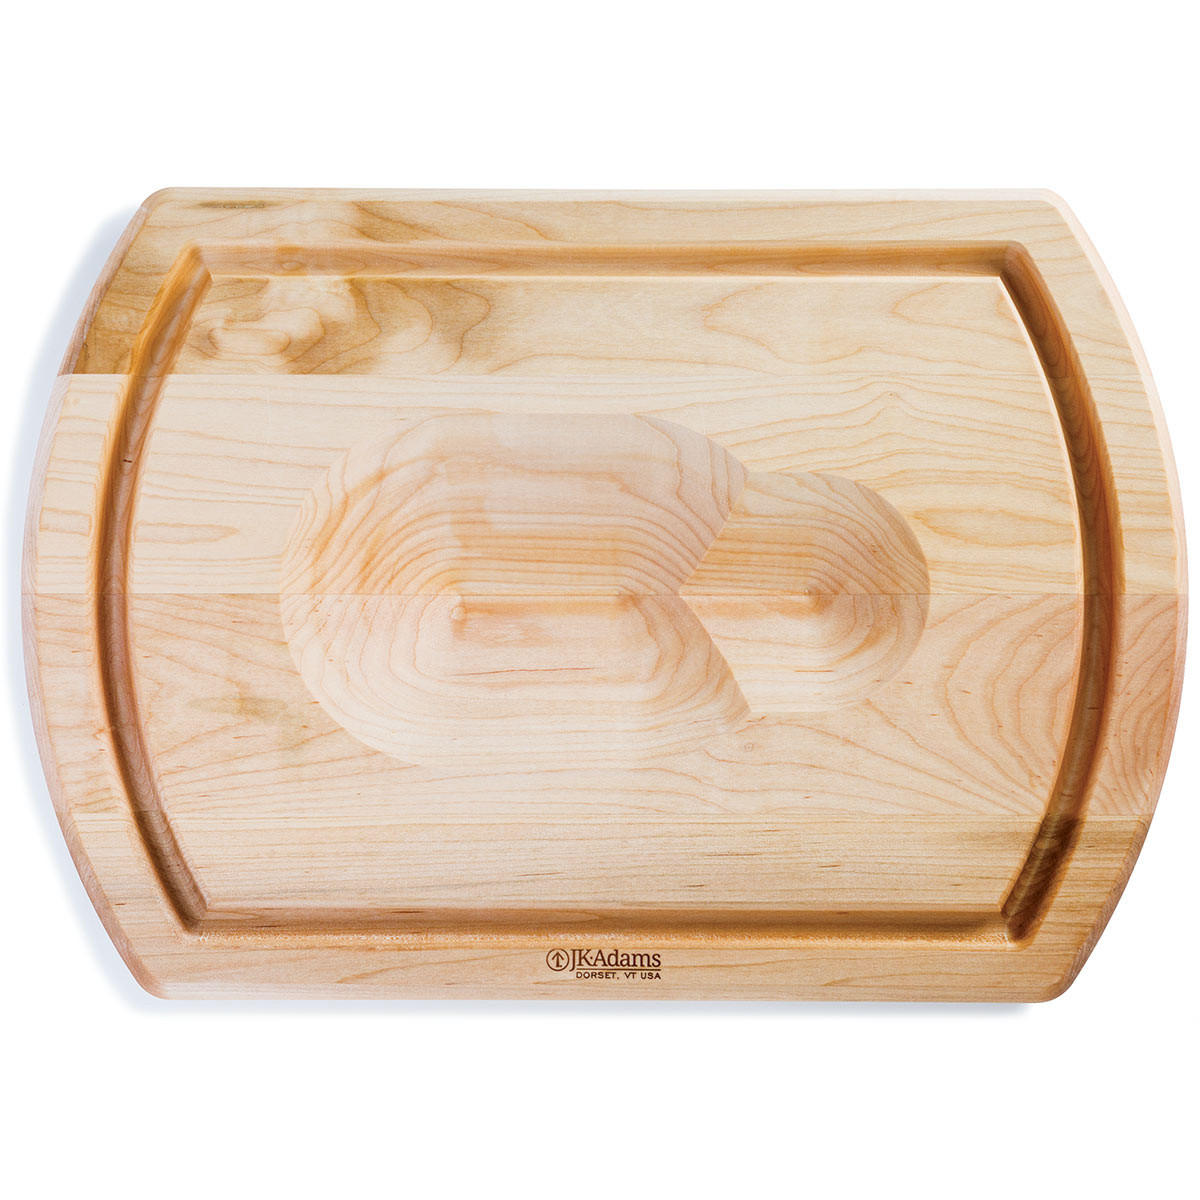  McMillin-Sumner Maple Reversible Carving Board | Stag Crest 'S' 